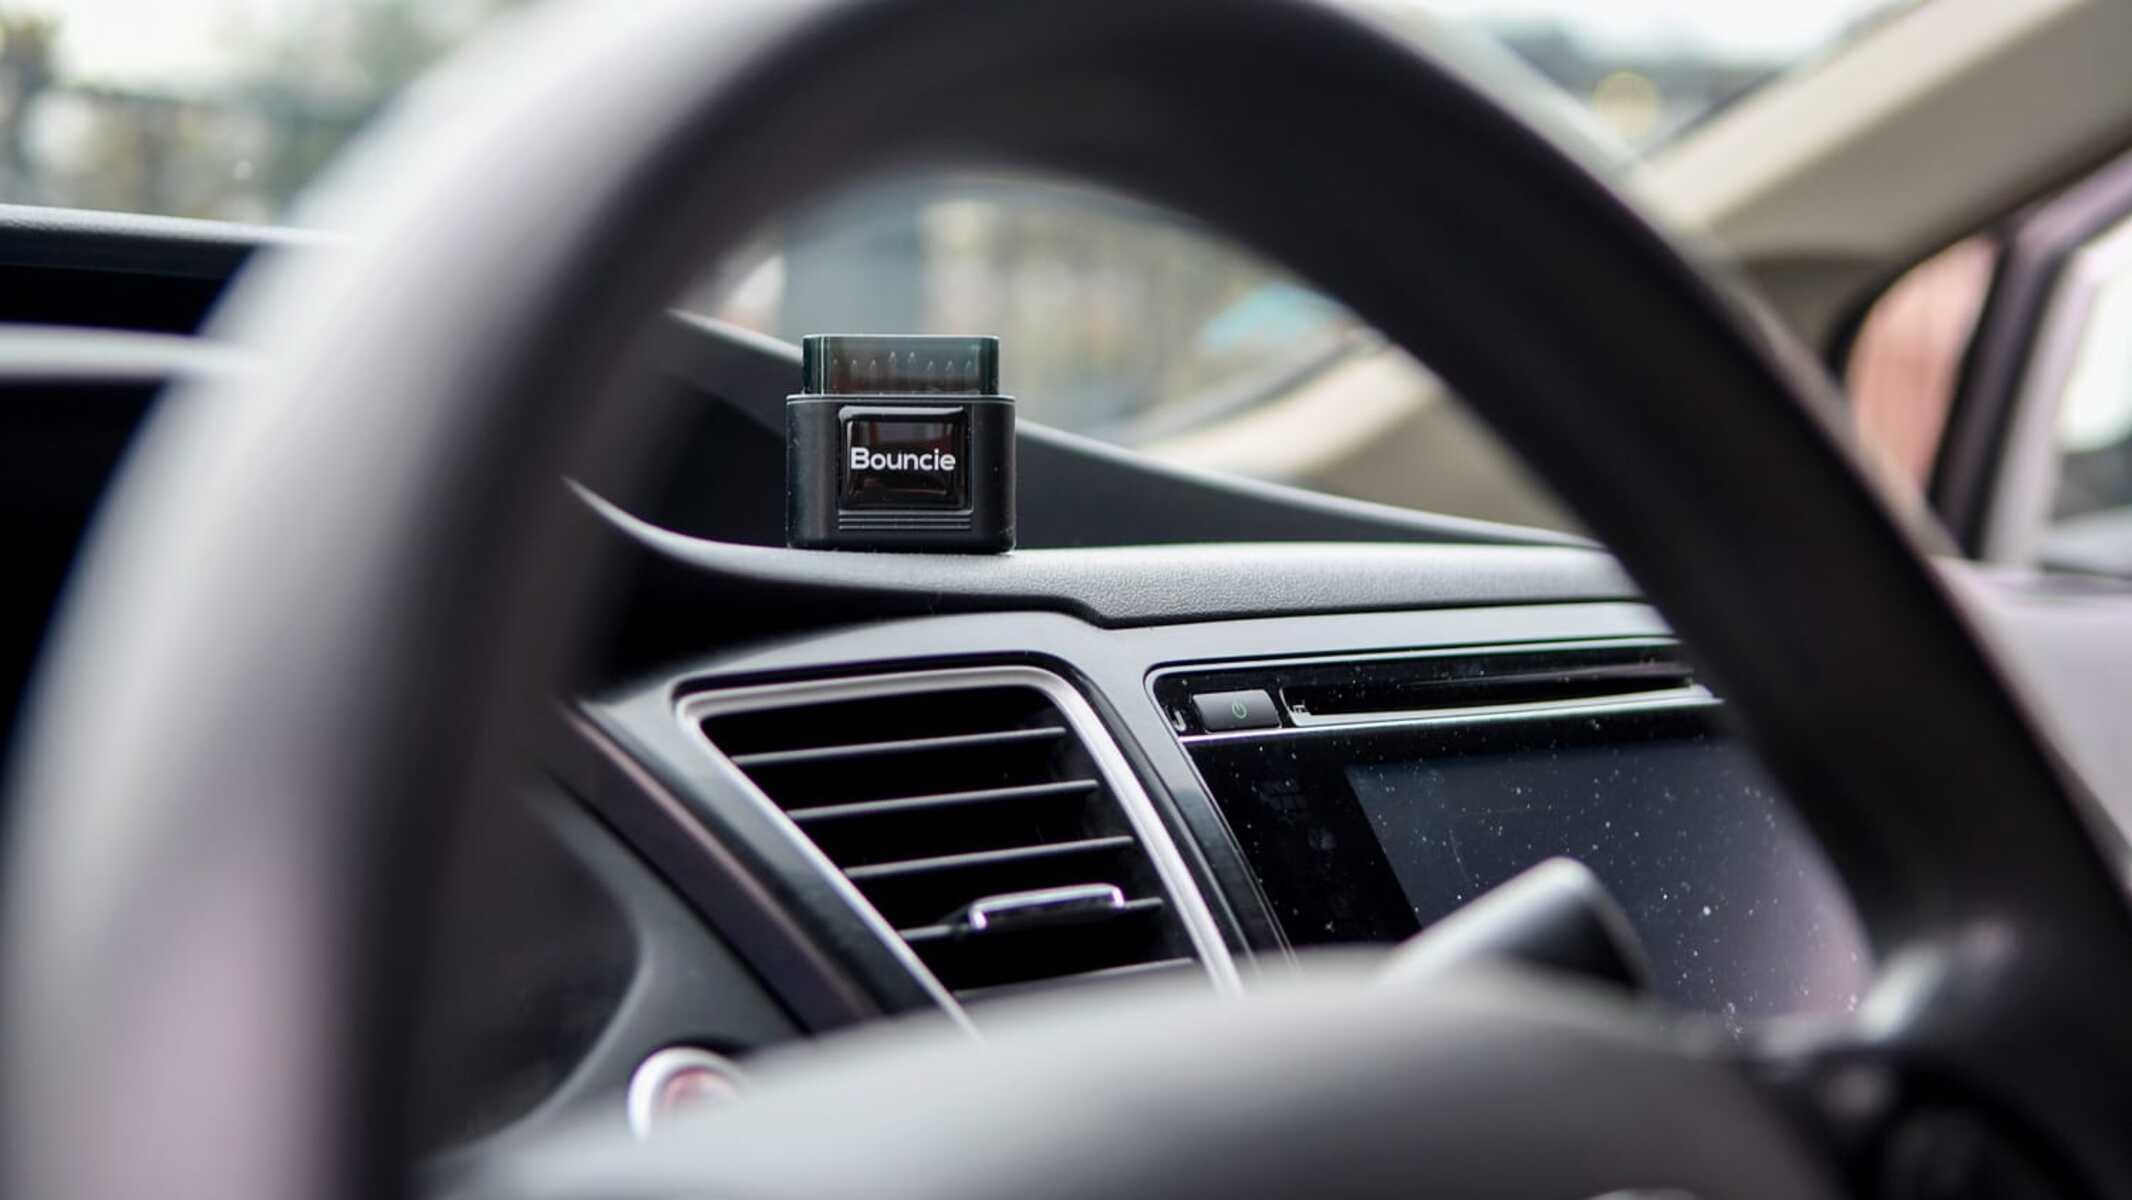 Vehicle Security: Choosing The Best GPS Tracker For Your Vehicle